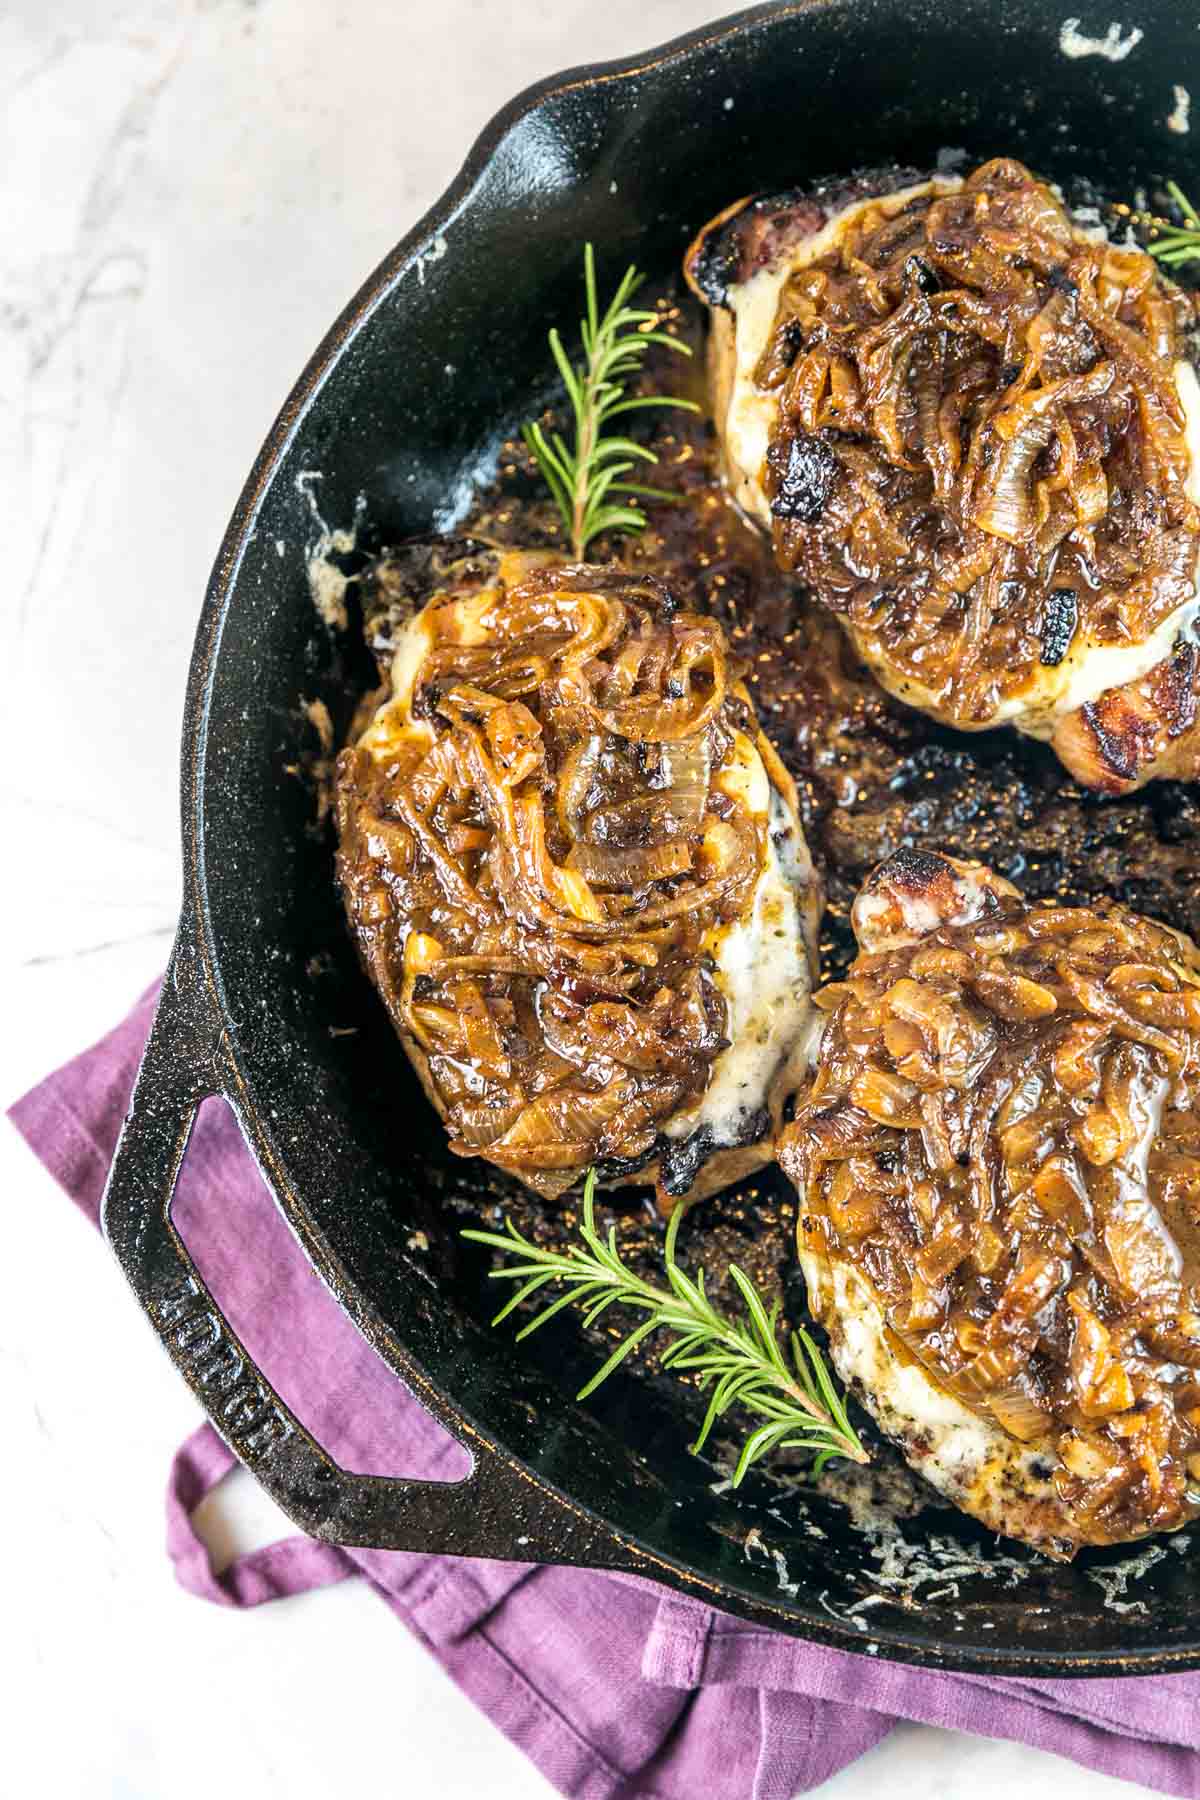 pork chops smothered with melted cheese and caramelized onions in a cast iron skillet